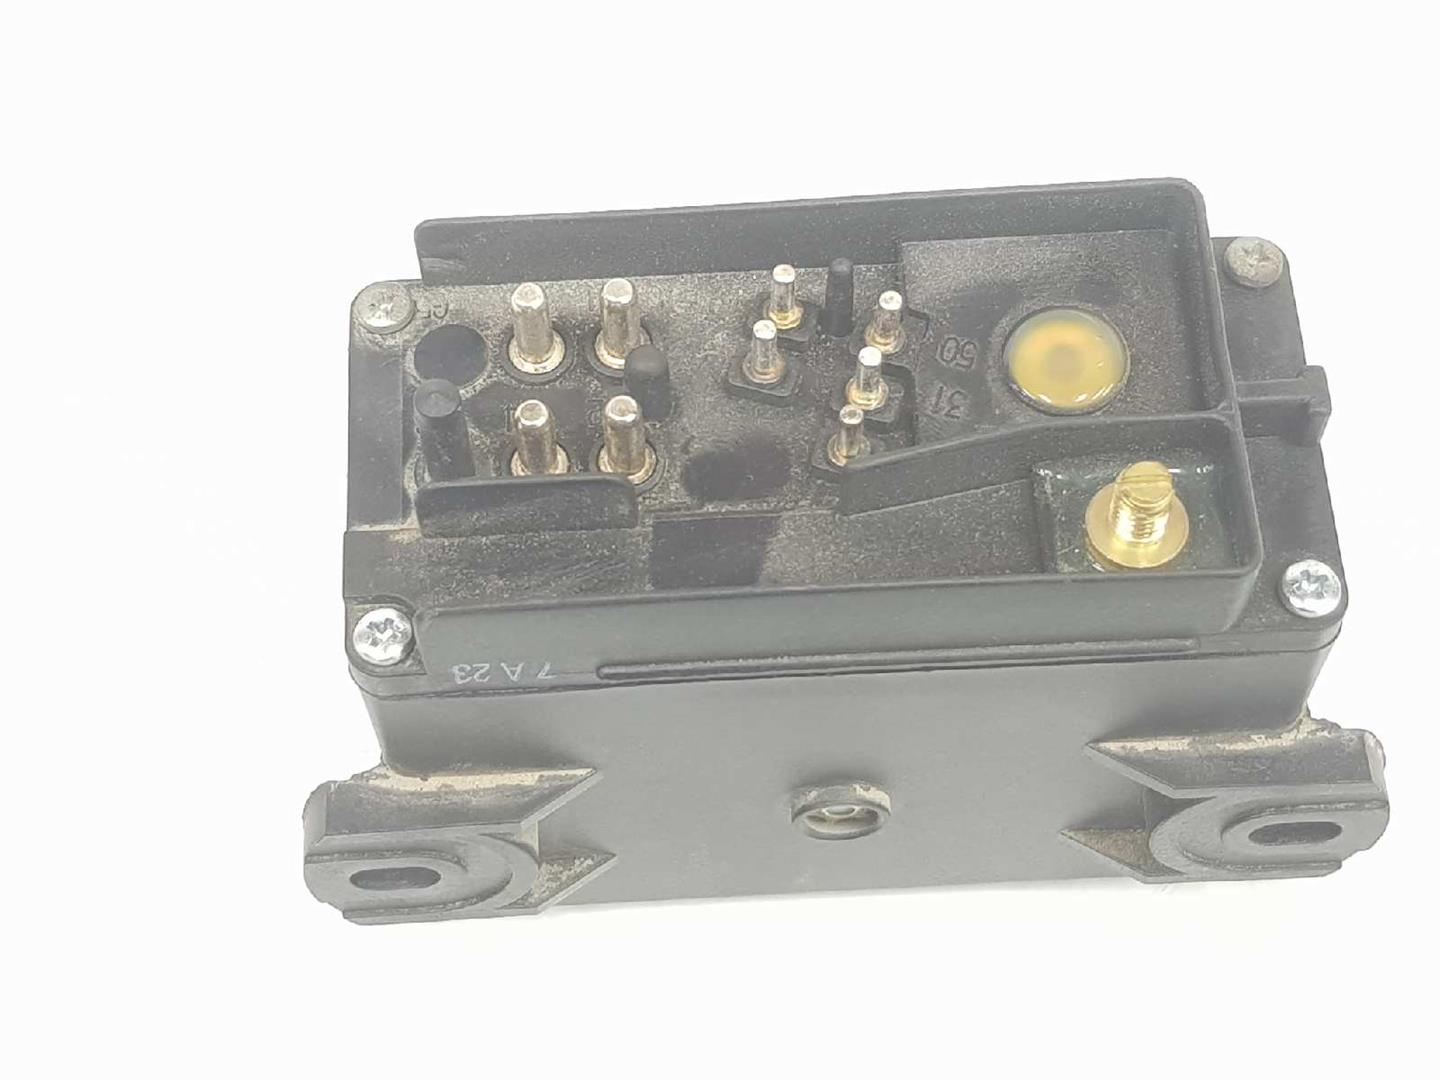 SSANGYONG Kyron 1 generation (2005-2015) Relays 8470009000, 8470009000 19750806